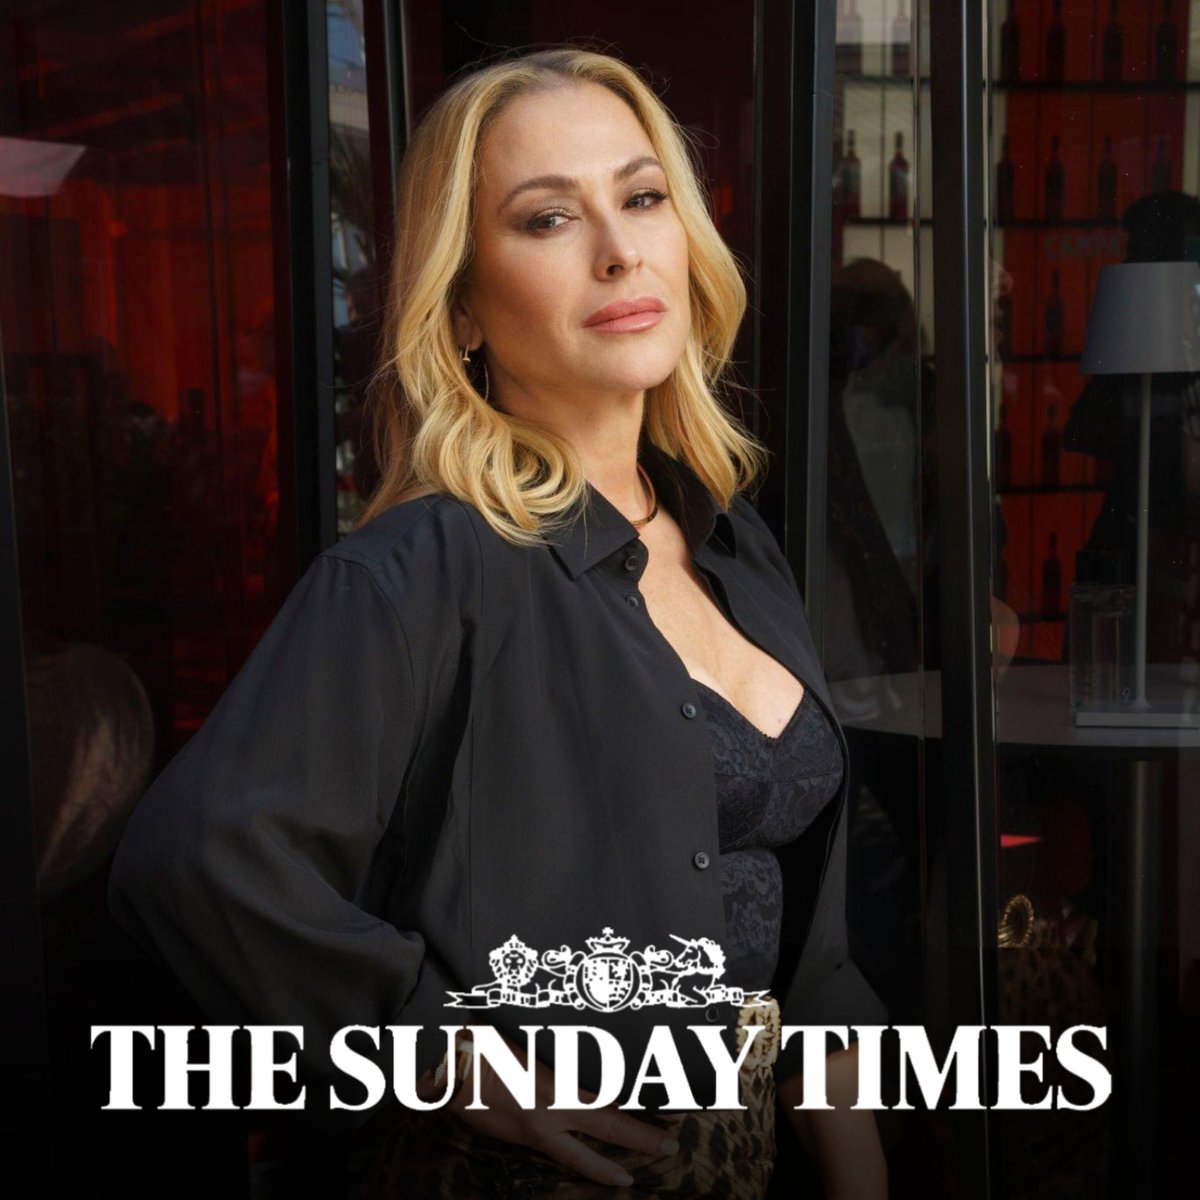 Anastacia was interviewed for The Sunday Times UK. She talks about her apartment in Denver, clumsy guests breaking her awards and more. Read here: bit.ly/49snvIG